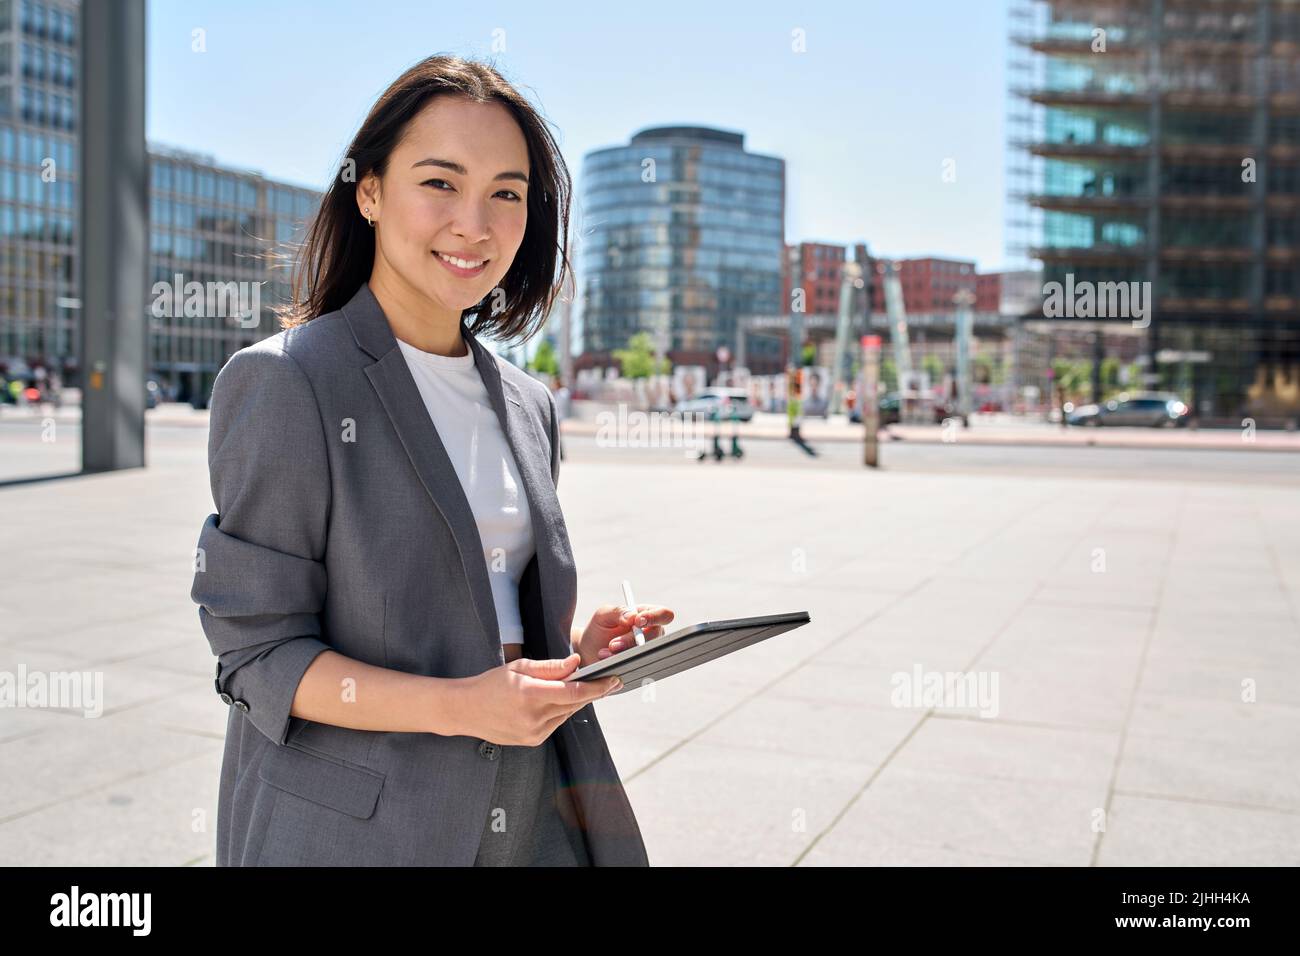 Young happy Asian business woman standing on city street holding digital tablet. Stock Photo